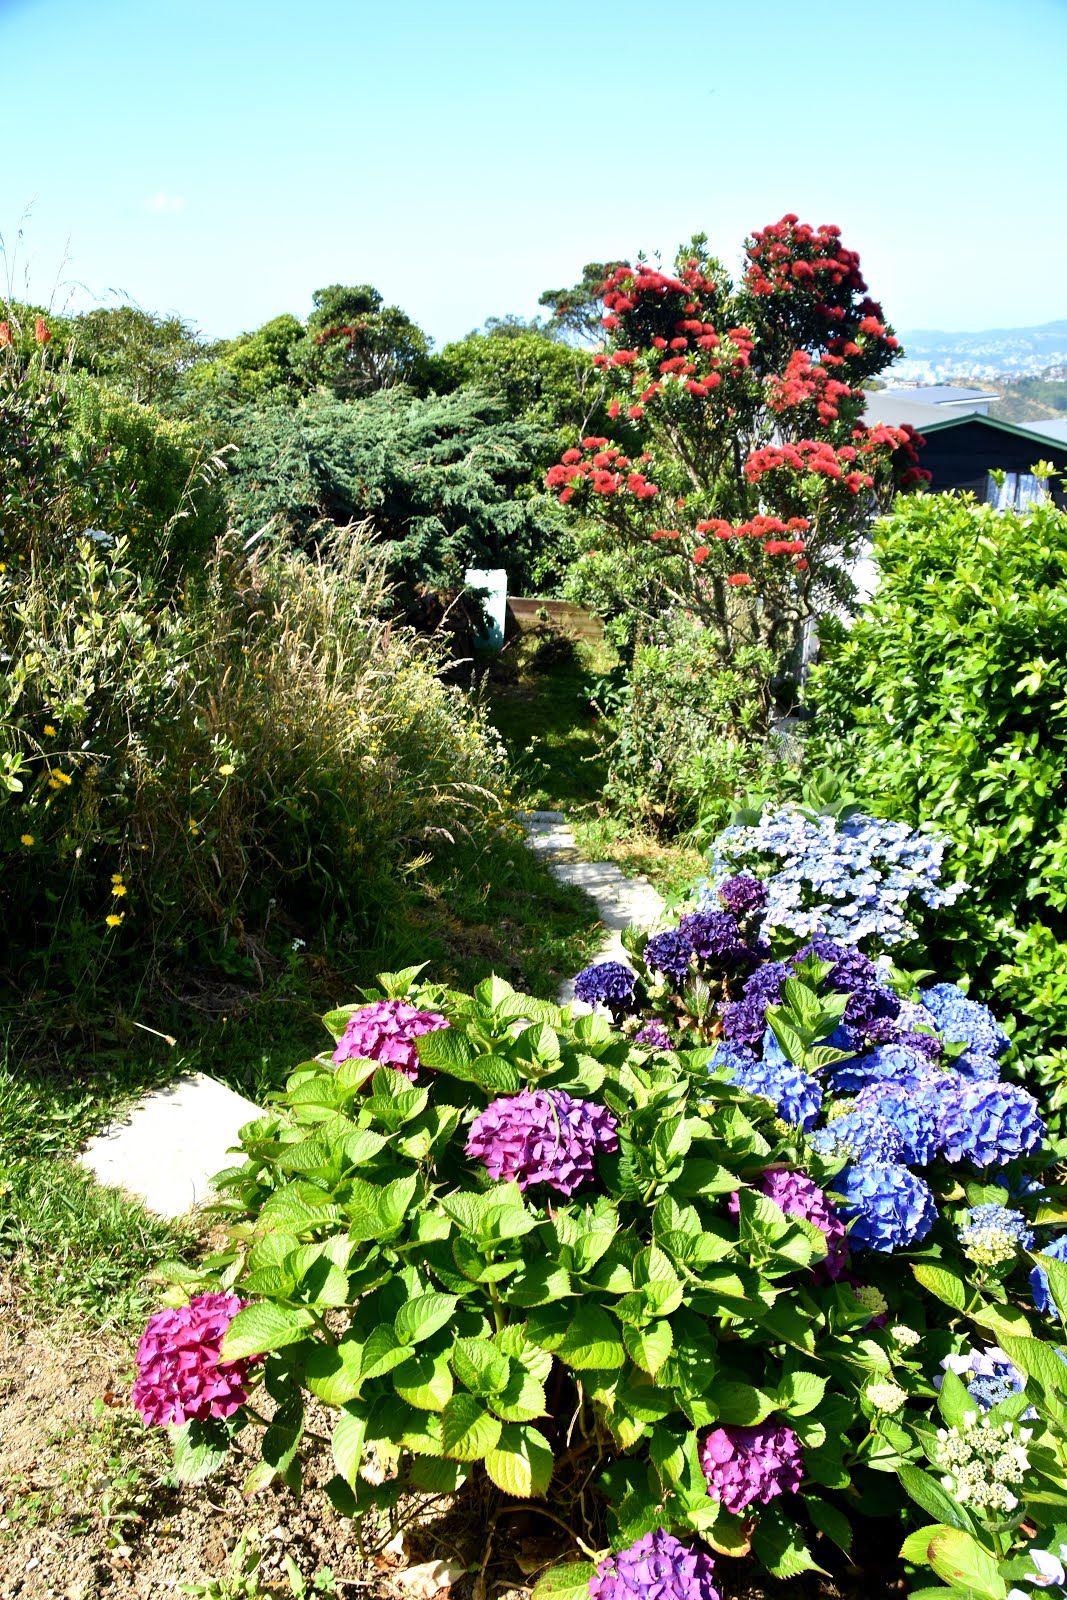 Down the garden path at back of house. Mischa's hydrangea plantings also going very well.